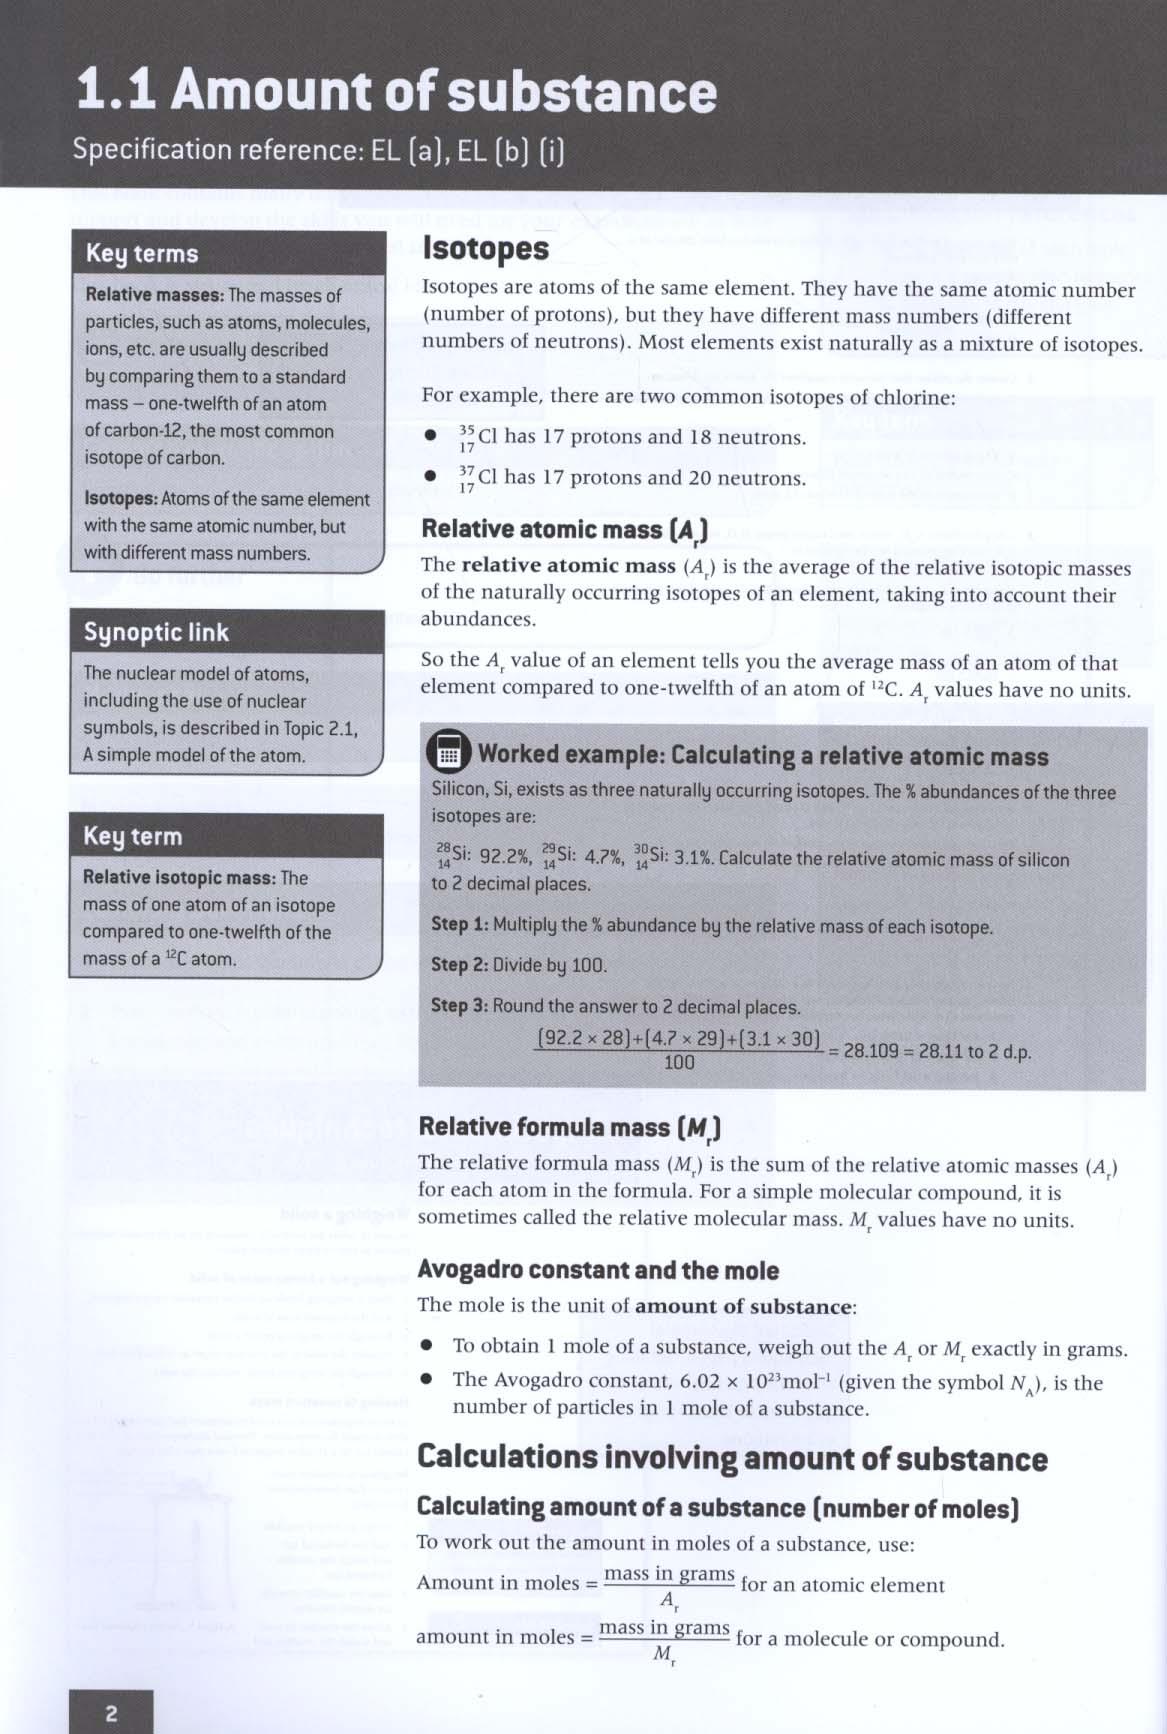 OCR A Level Salters' Advanced Chemistry Revision Guide